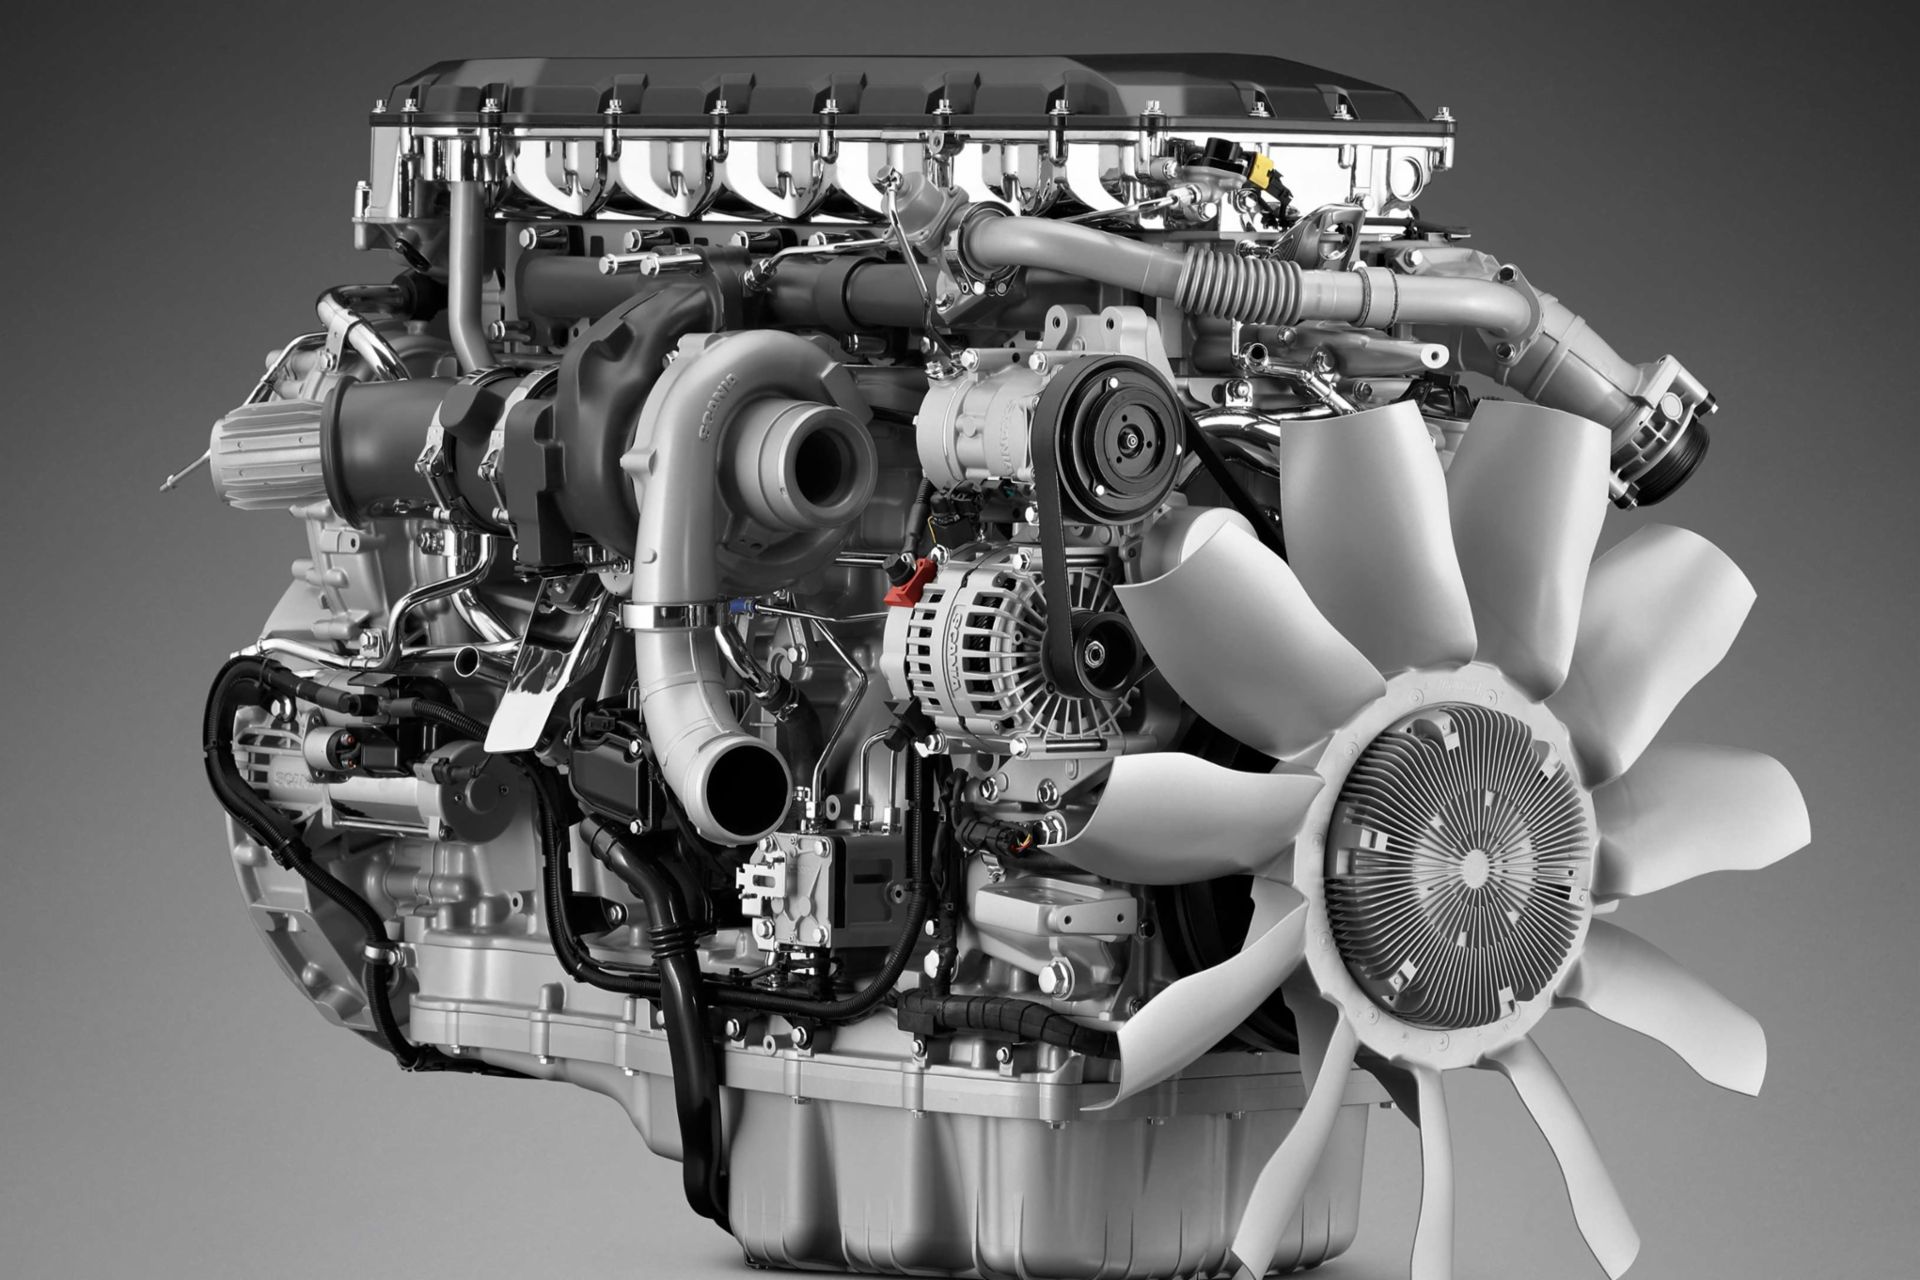 TRATON presents its first joint diesel engine for heavy-duty trucks.
                 